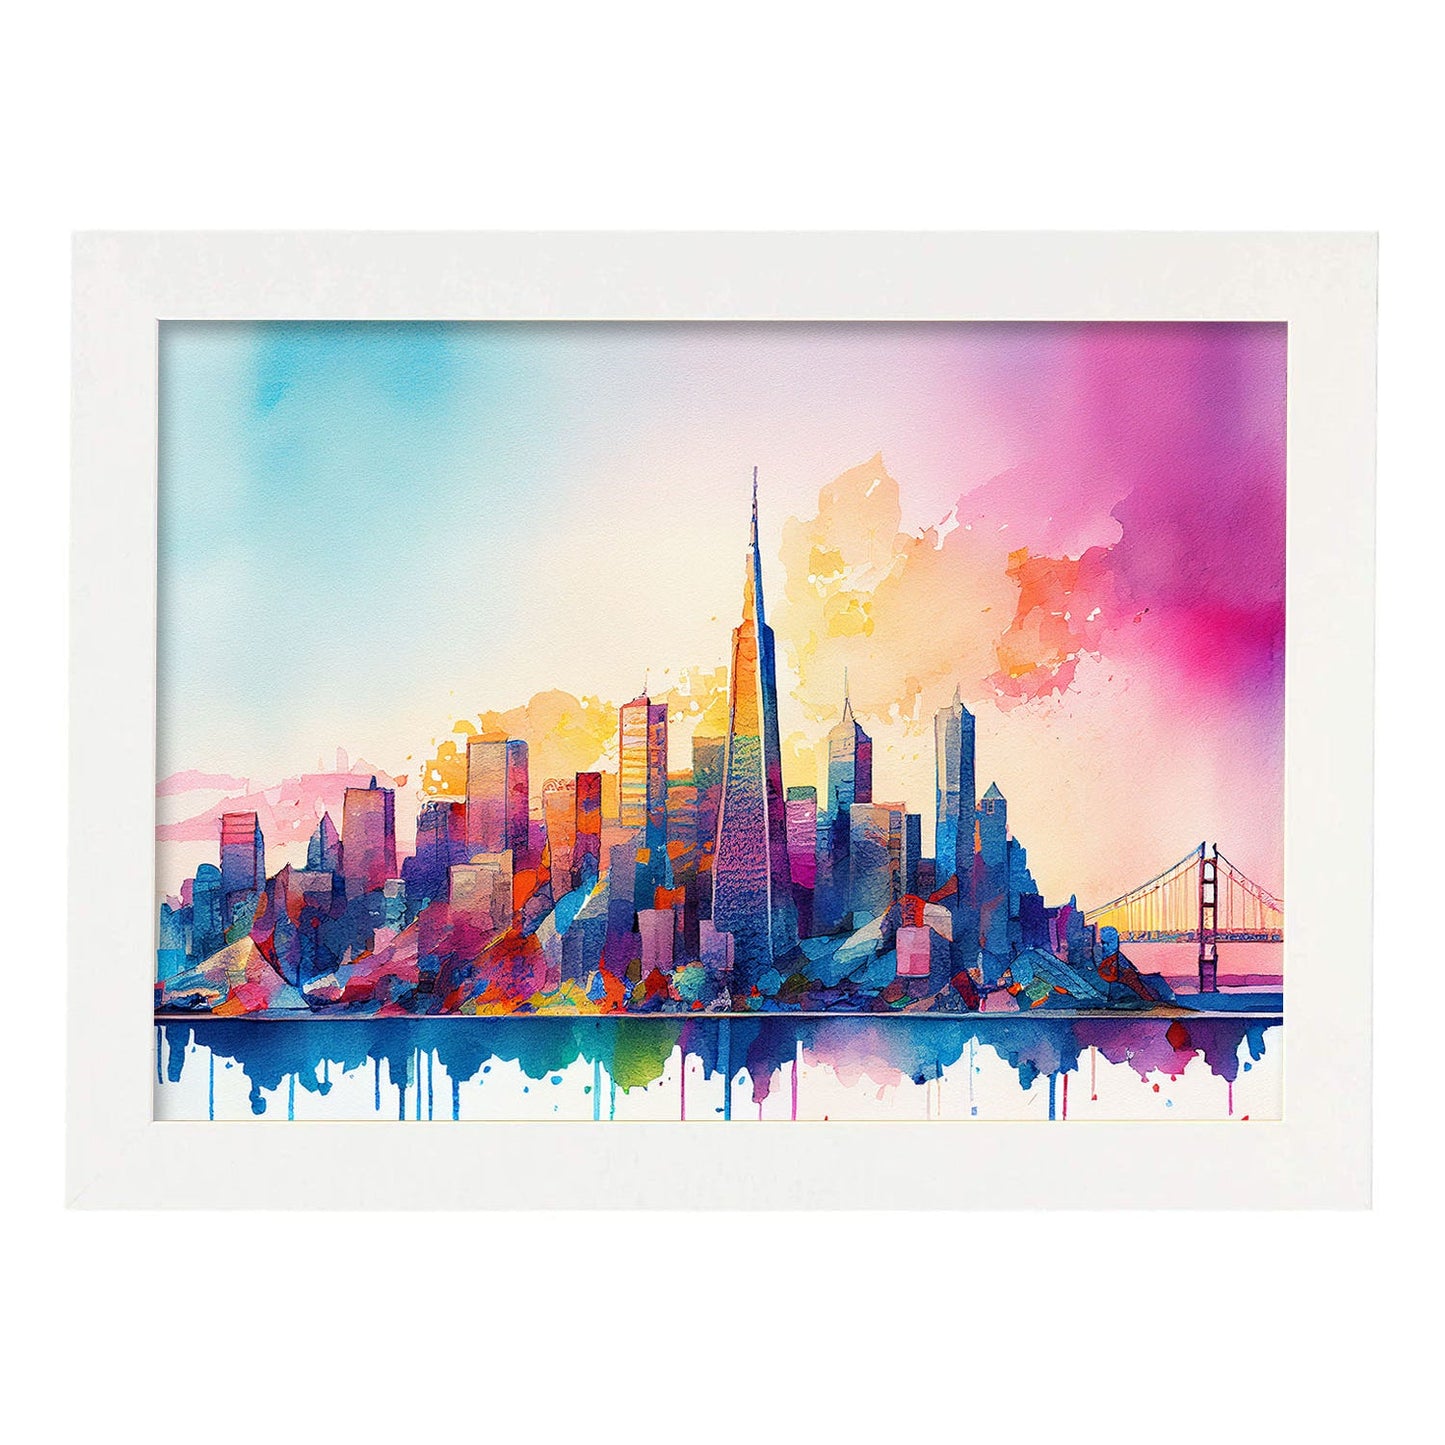 Nacnic watercolor of a skyline of the city of San Francisco. Aesthetic Wall Art Prints for Bedroom or Living Room Design.-Artwork-Nacnic-A4-Marco Blanco-Nacnic Estudio SL